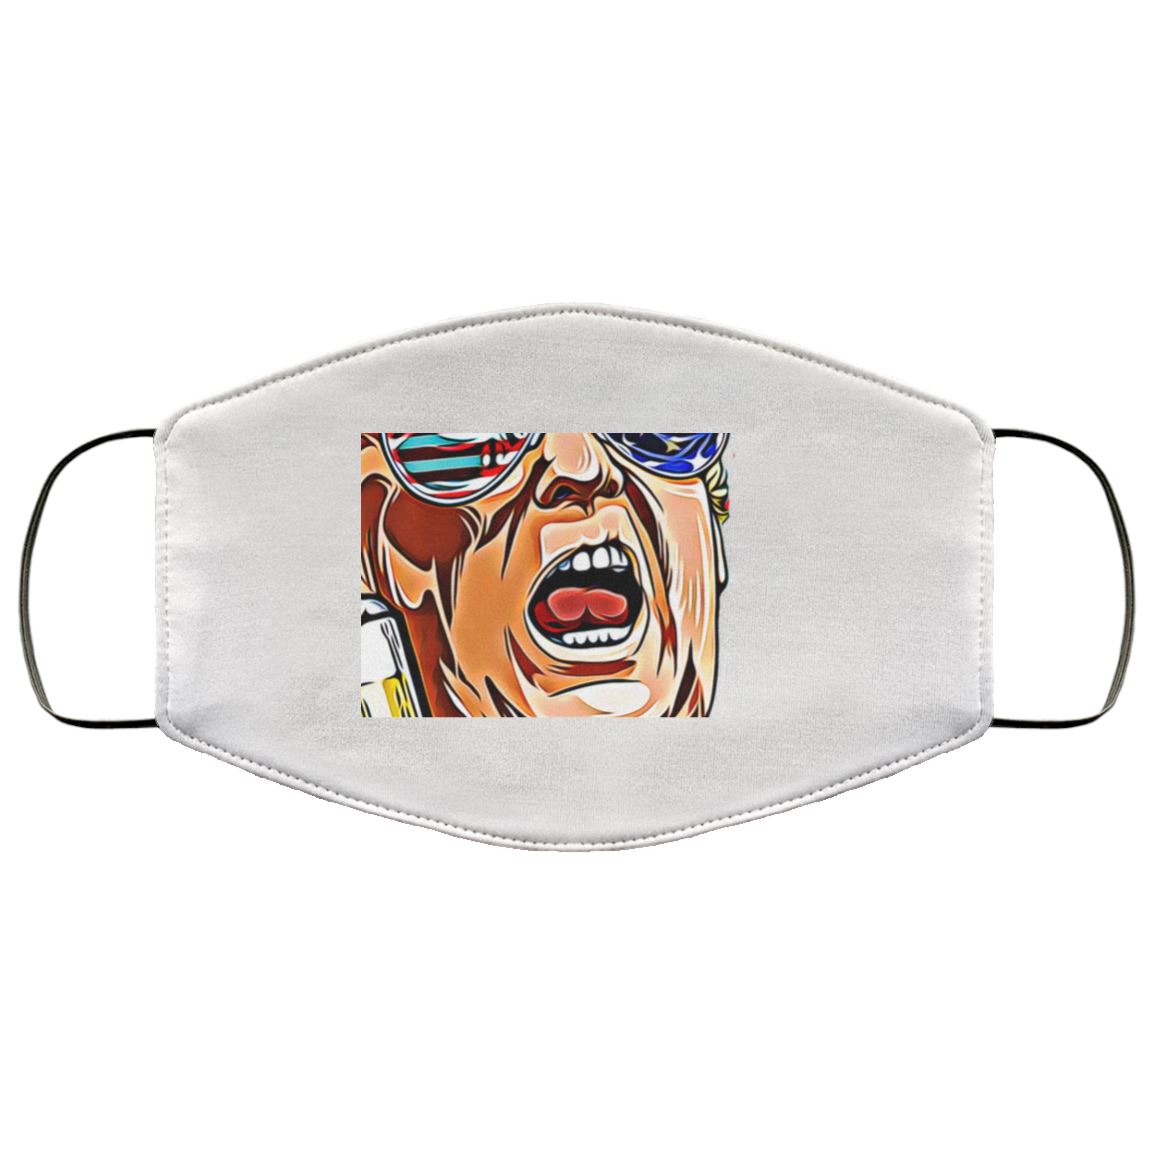 Trump Mouth Open Facemask Template Face Mask - Houseboat Kings